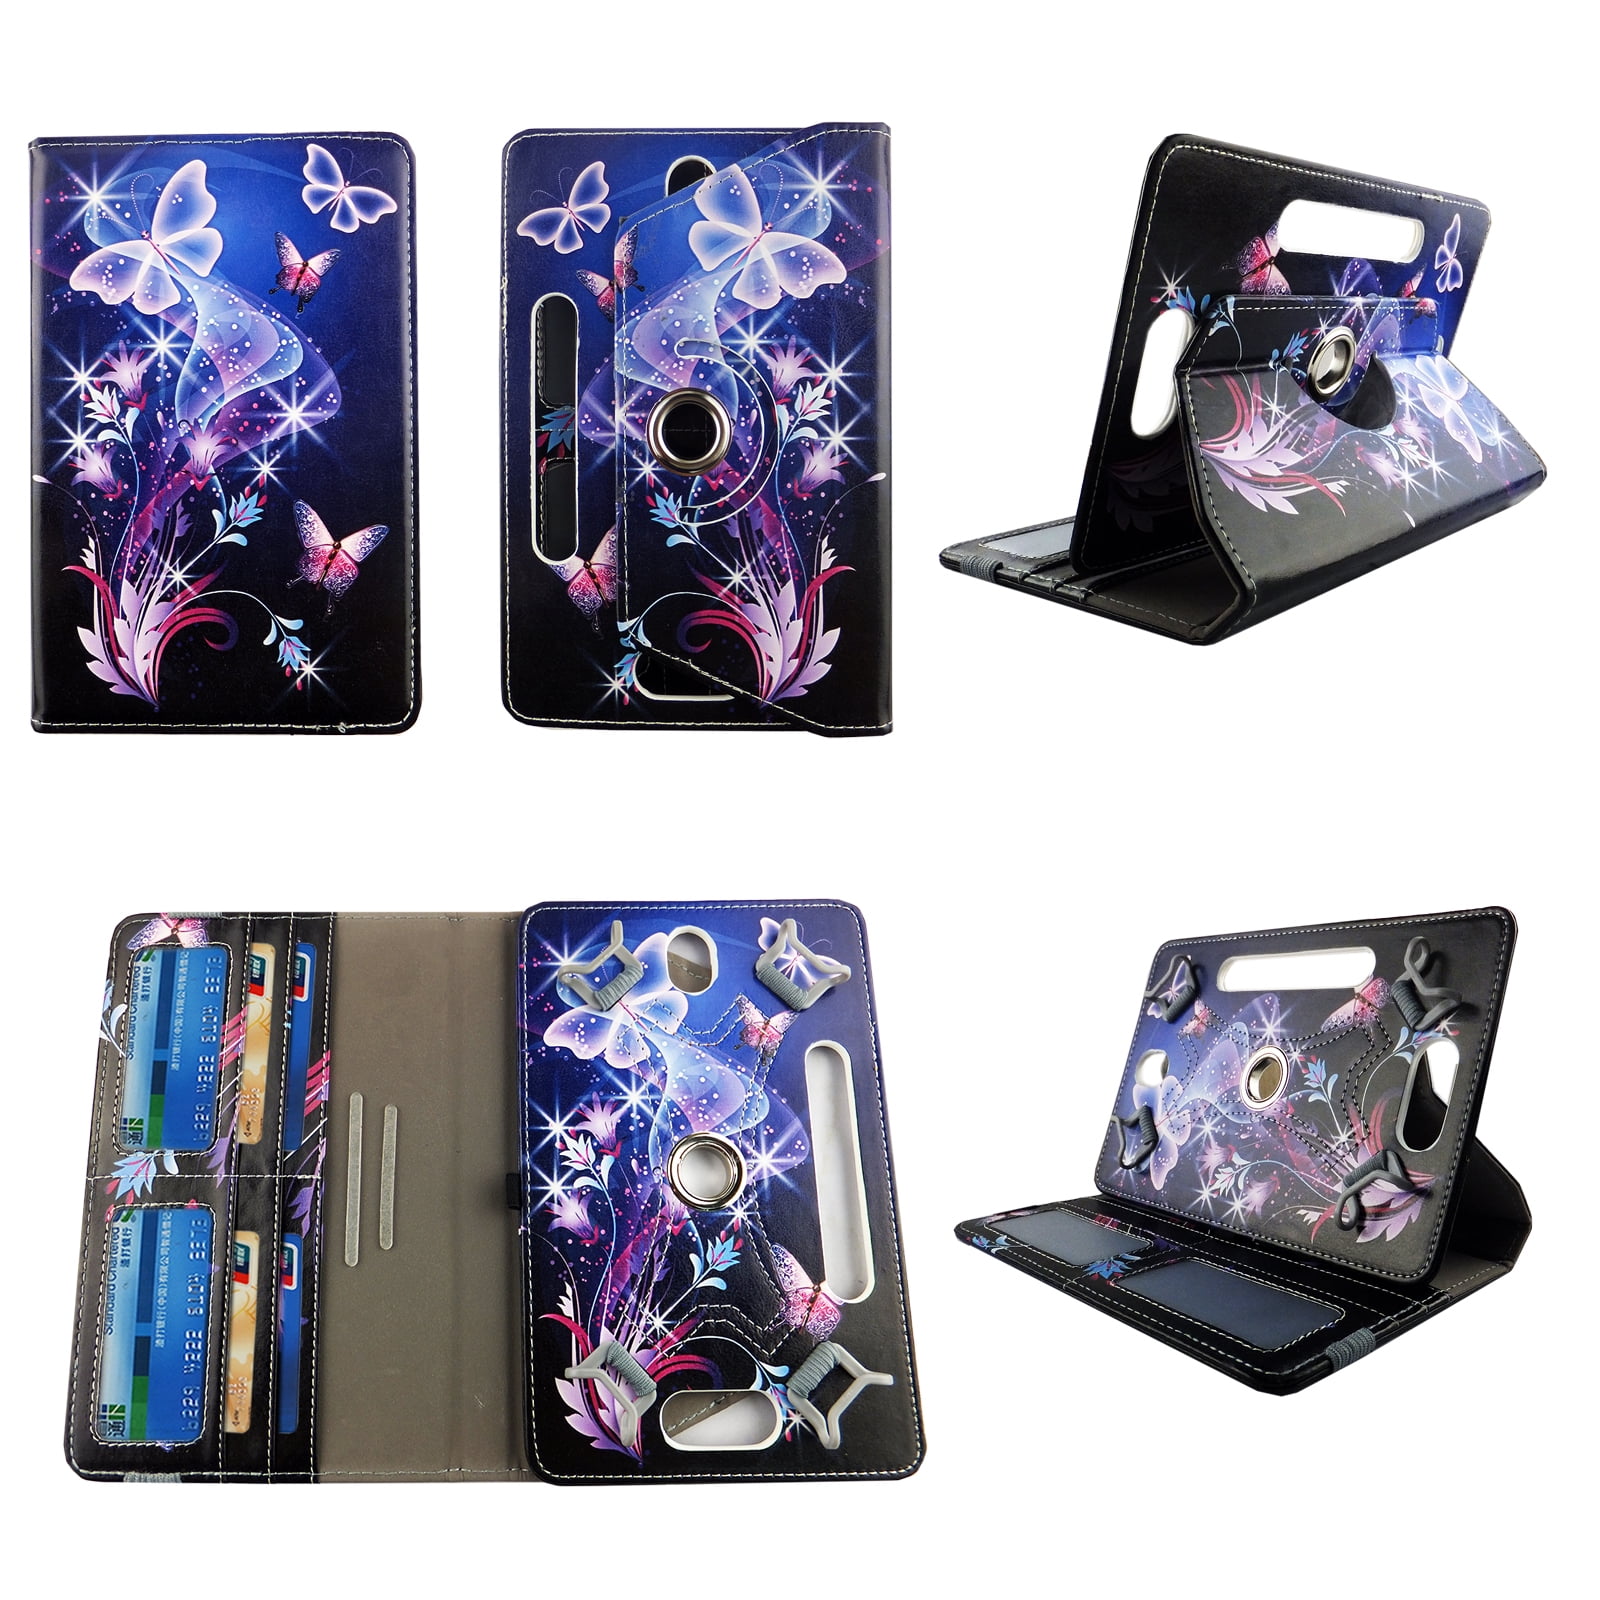 Galaxy Style tablet case 10 inch for Visual Land Prestige 10" 10inch android cases 360 rotating slim folio stand pu leather travel e-reader cash slots - Walmart.com